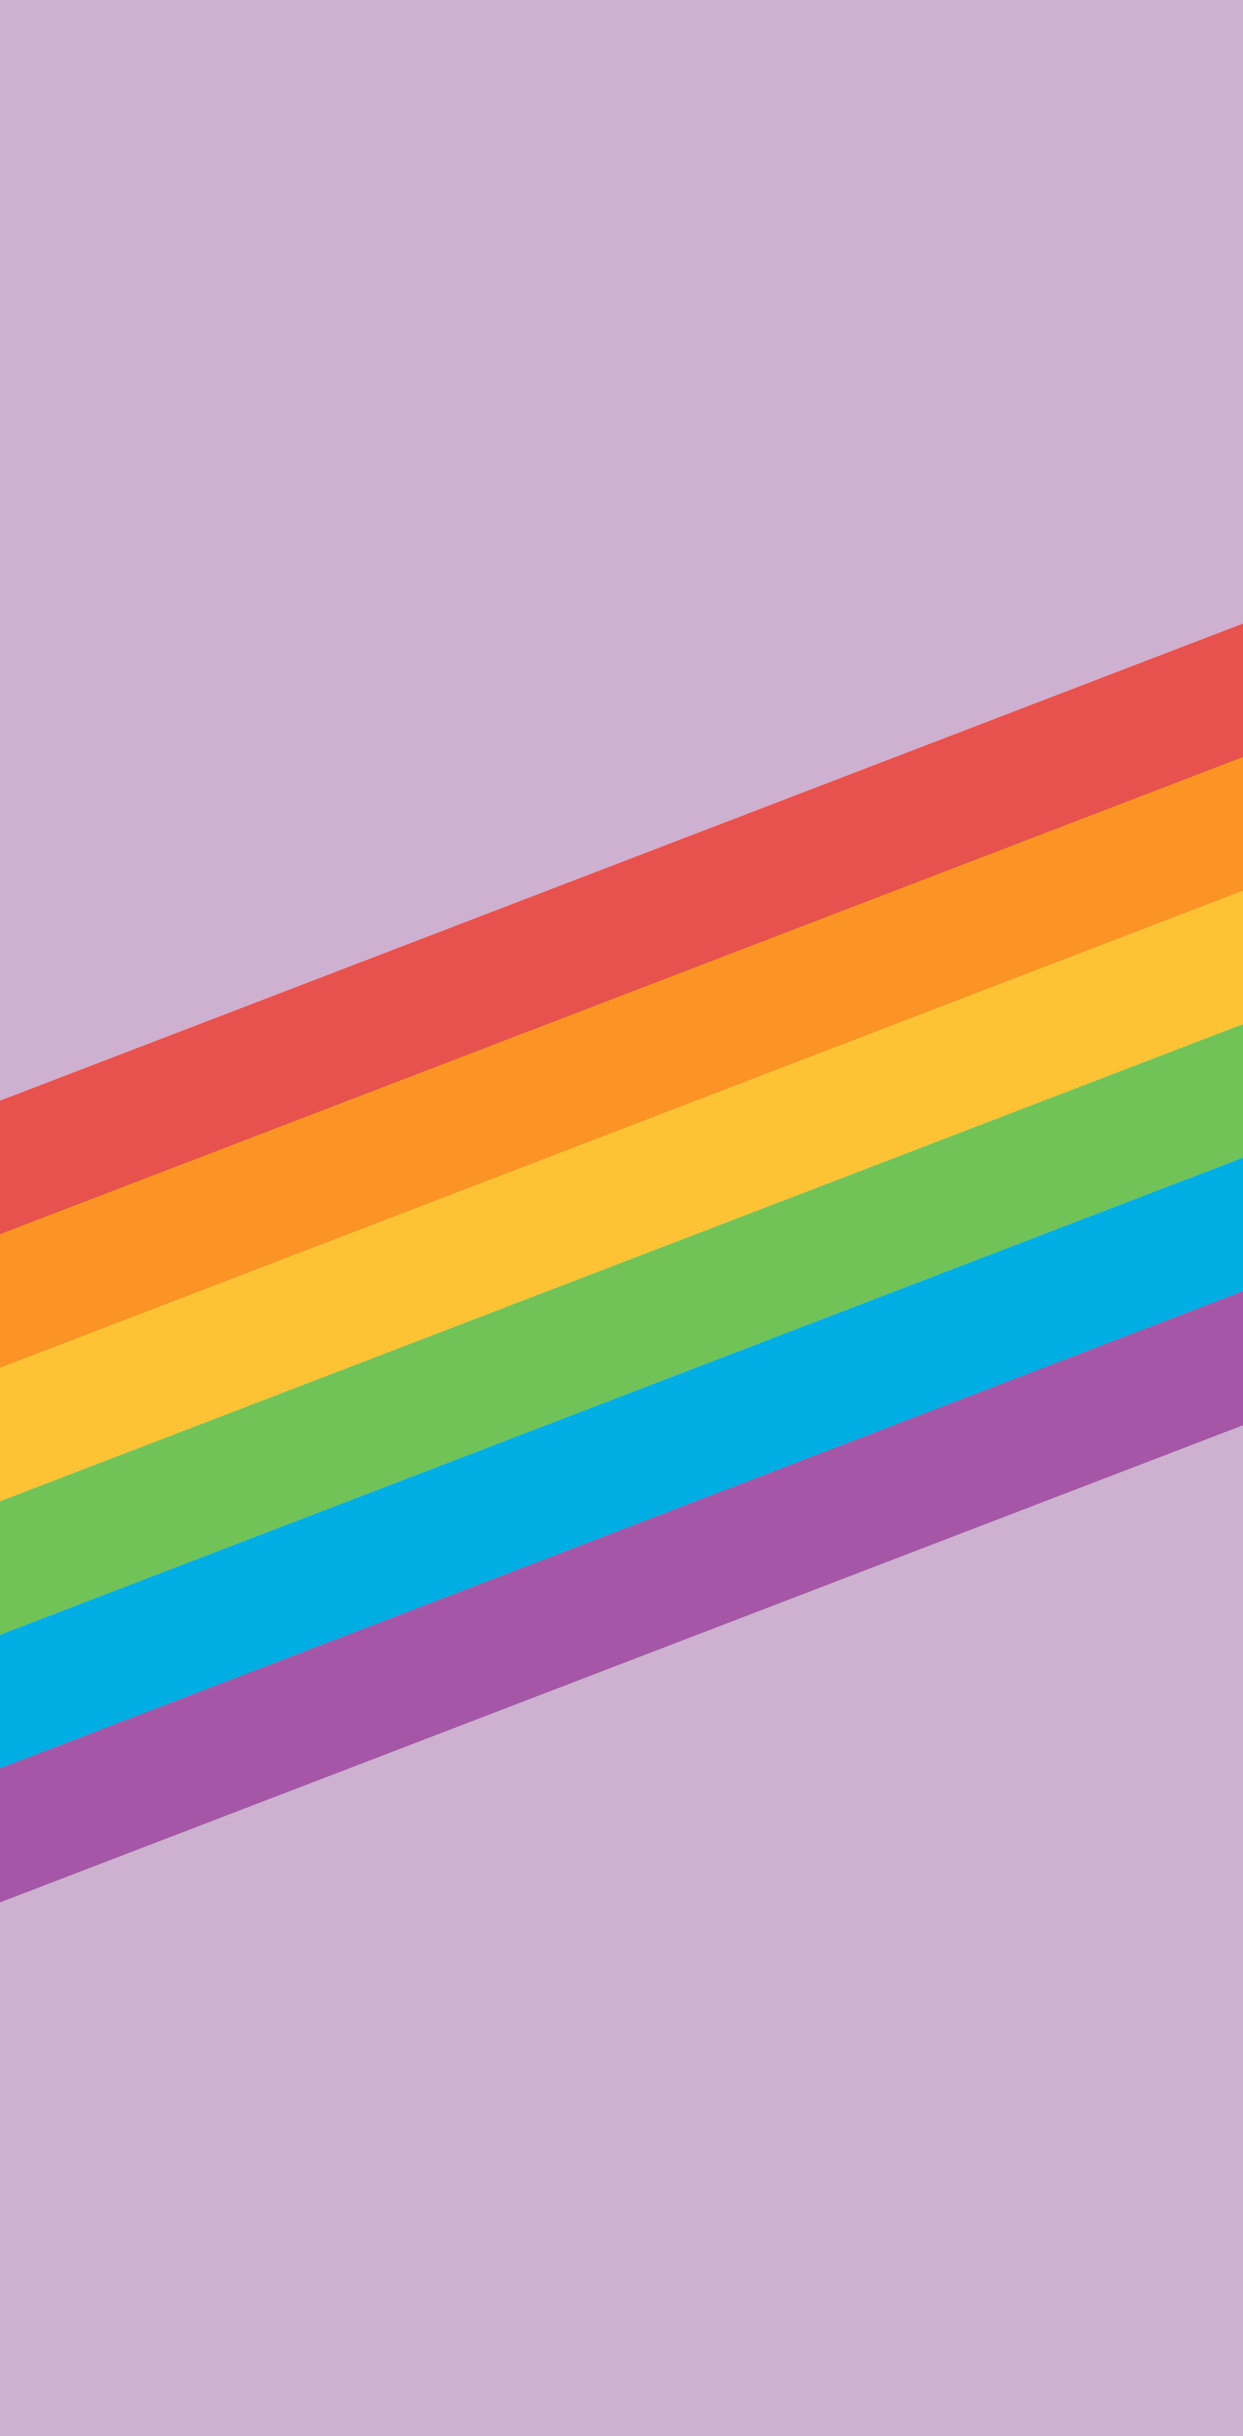 A rainbow on a purple background - Pride, bisexual